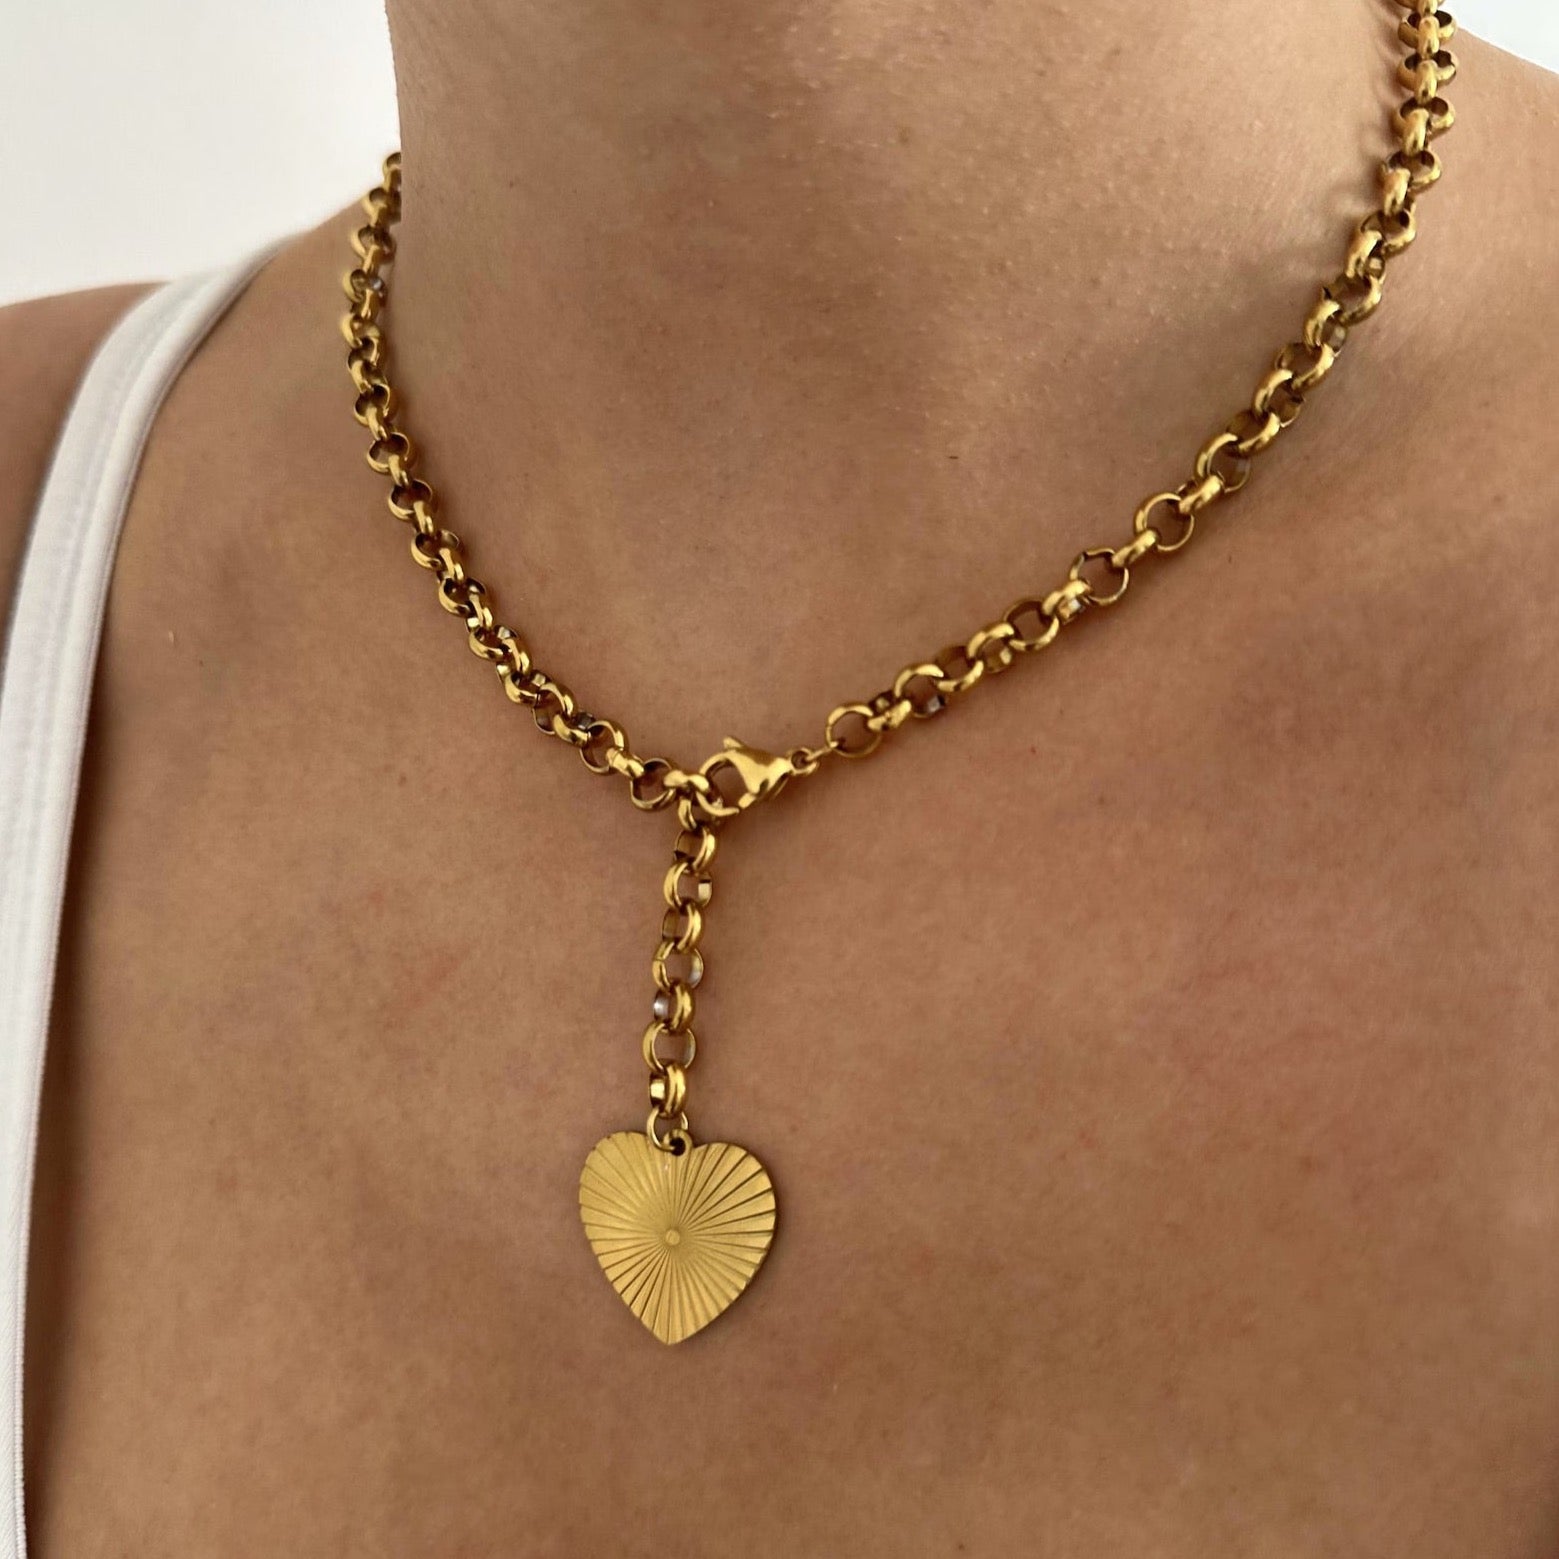 Heart Pendant Necklace complementing a beautiful gold chain